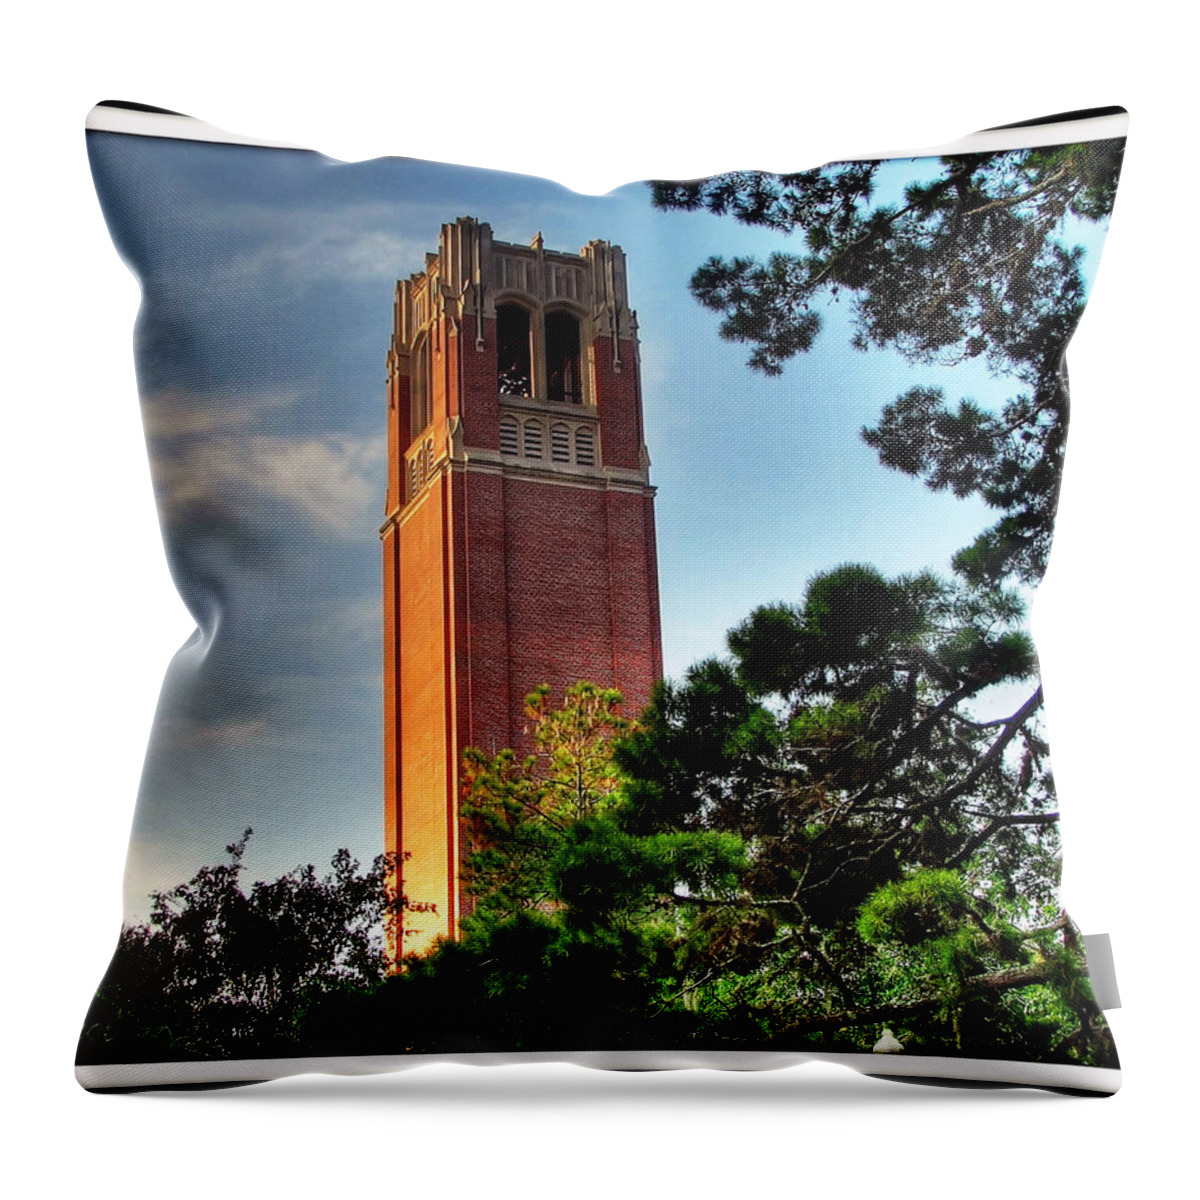 Century Throw Pillow featuring the photograph Century Tower by Farol Tomson